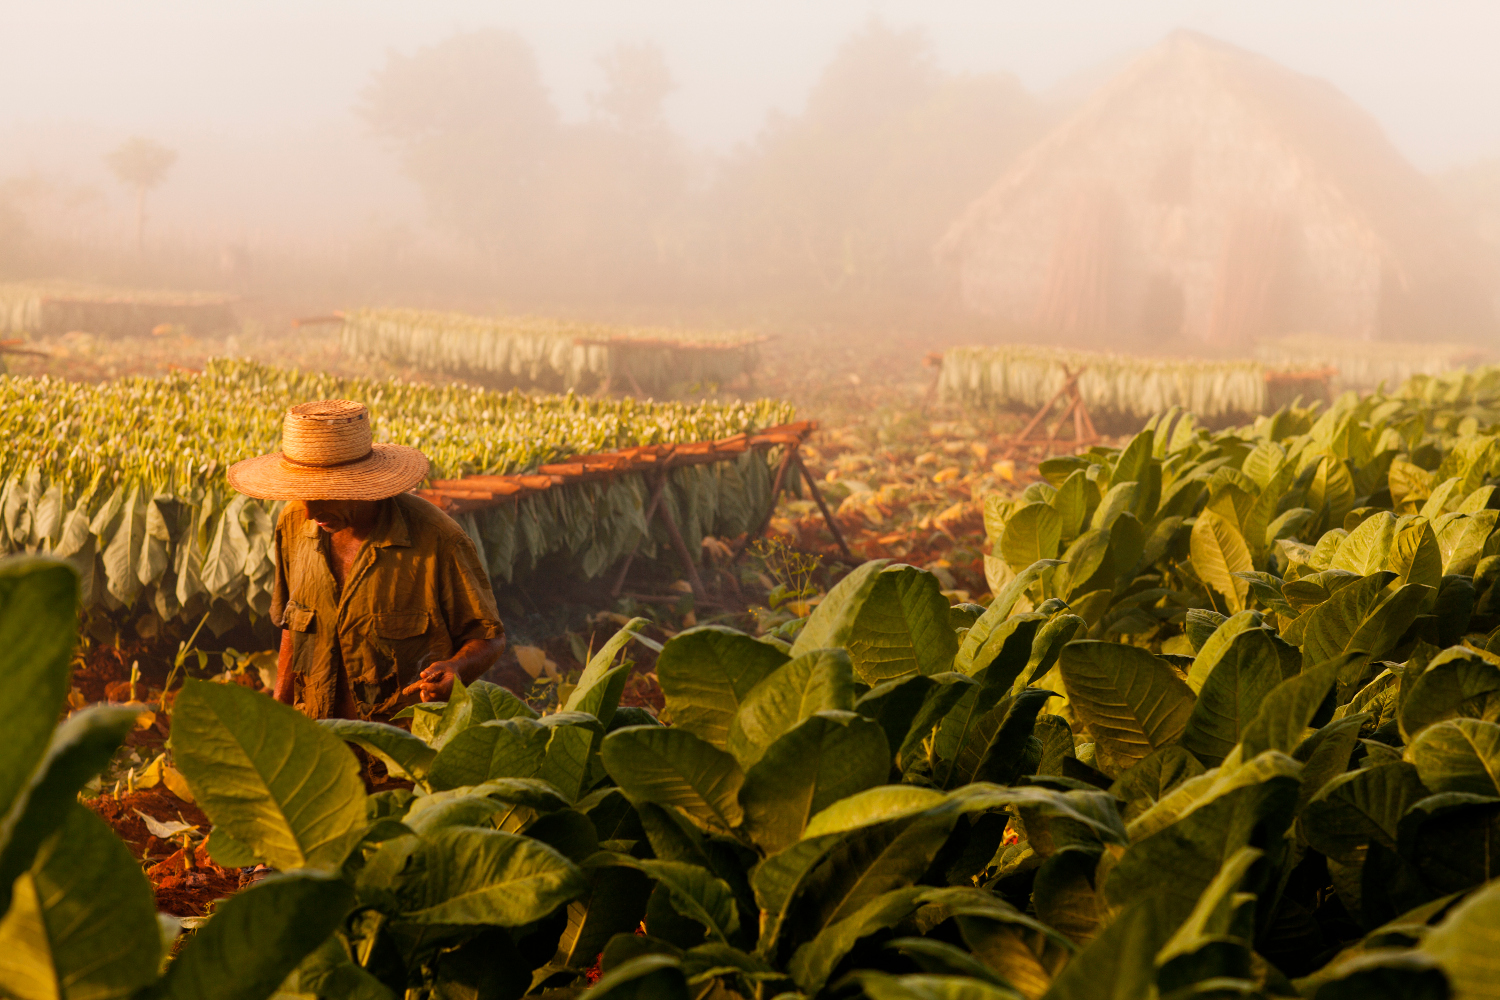 Visit one of Viñales' tobacco plantations and you can see first-hand how Cuba's top-class crops are cultivated. Image by Merten Snijders / Lonely Planet Images / Getty